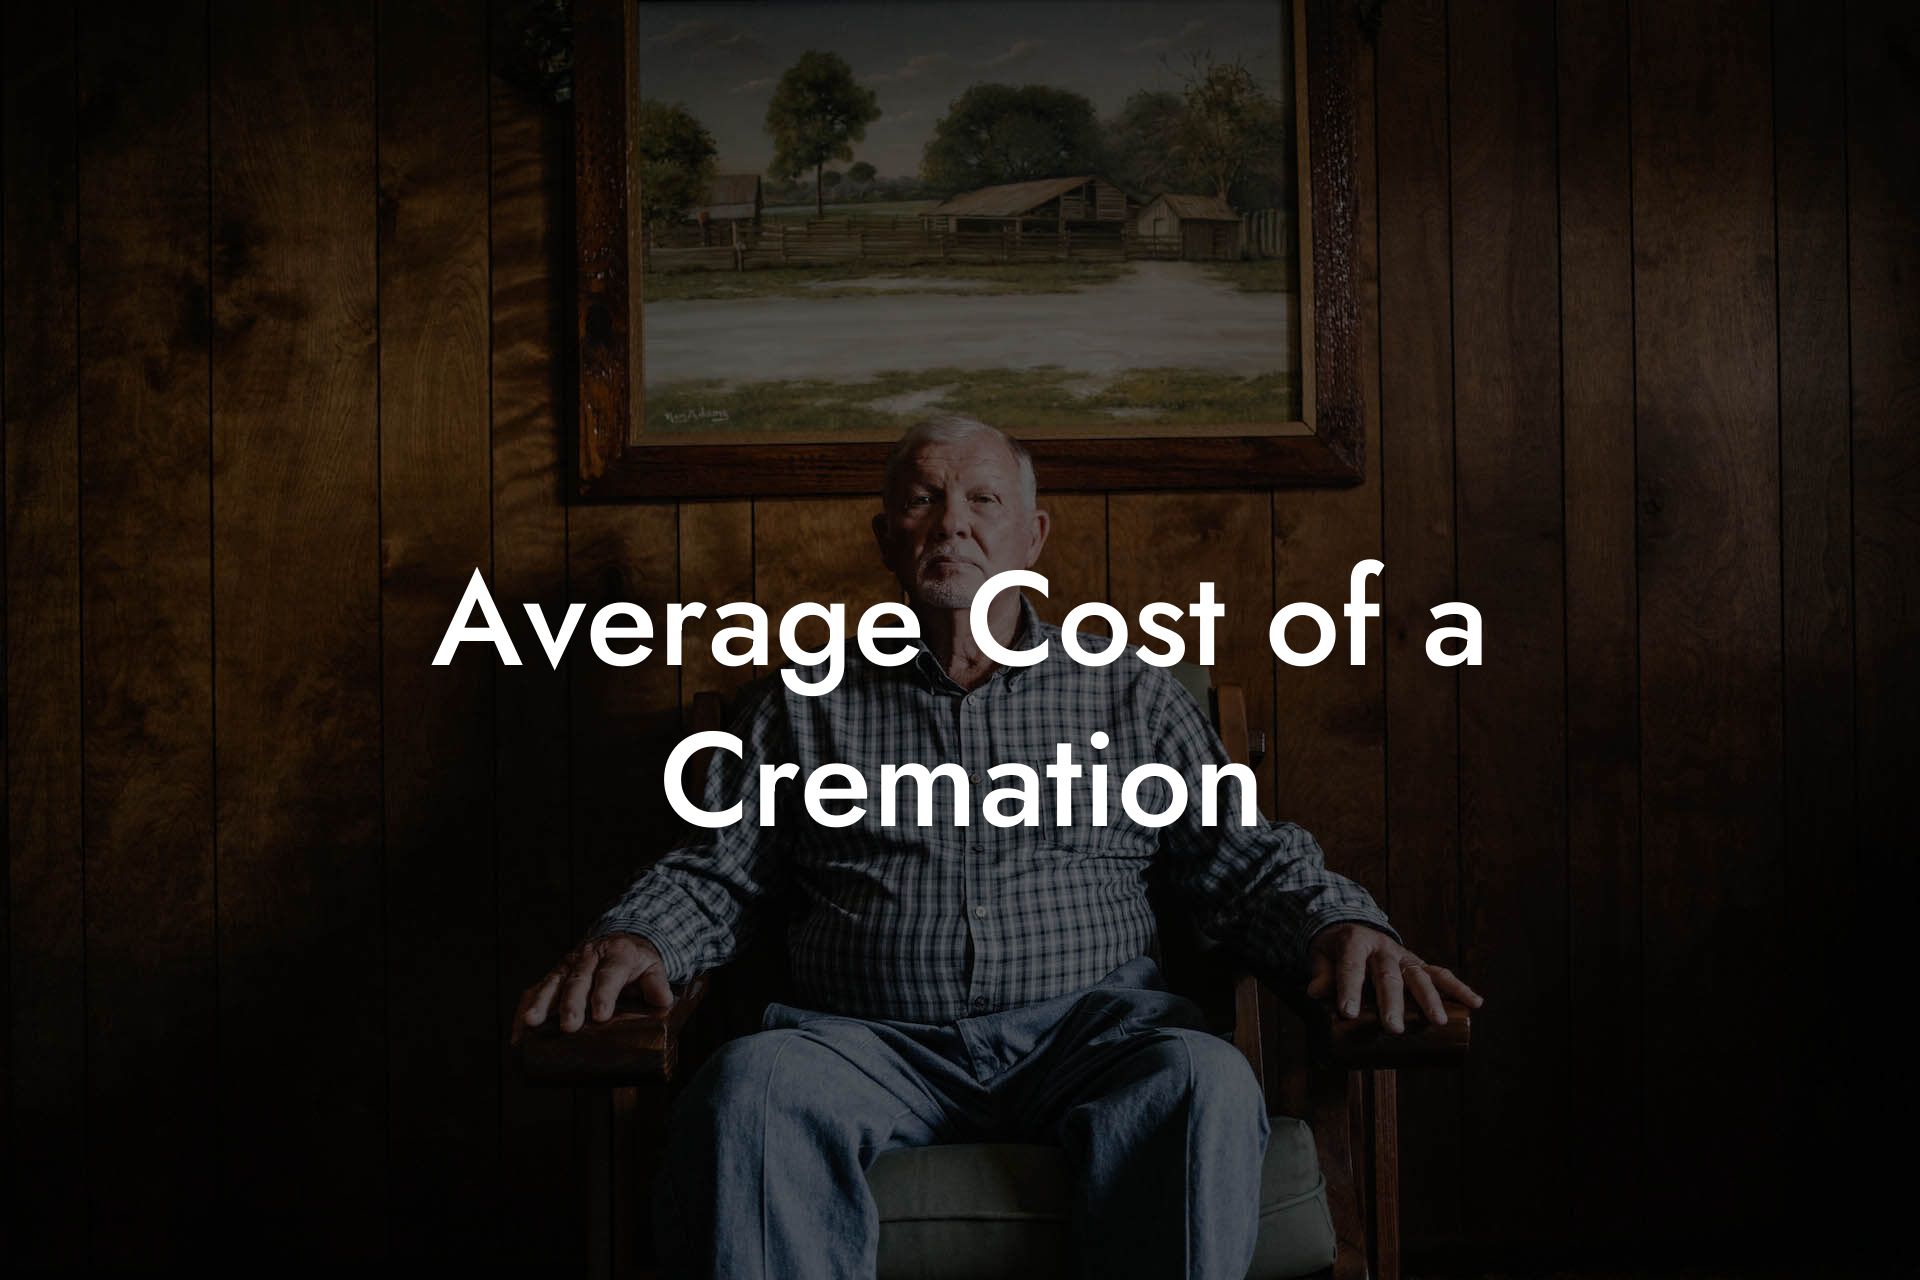 Average Cost of a Cremation